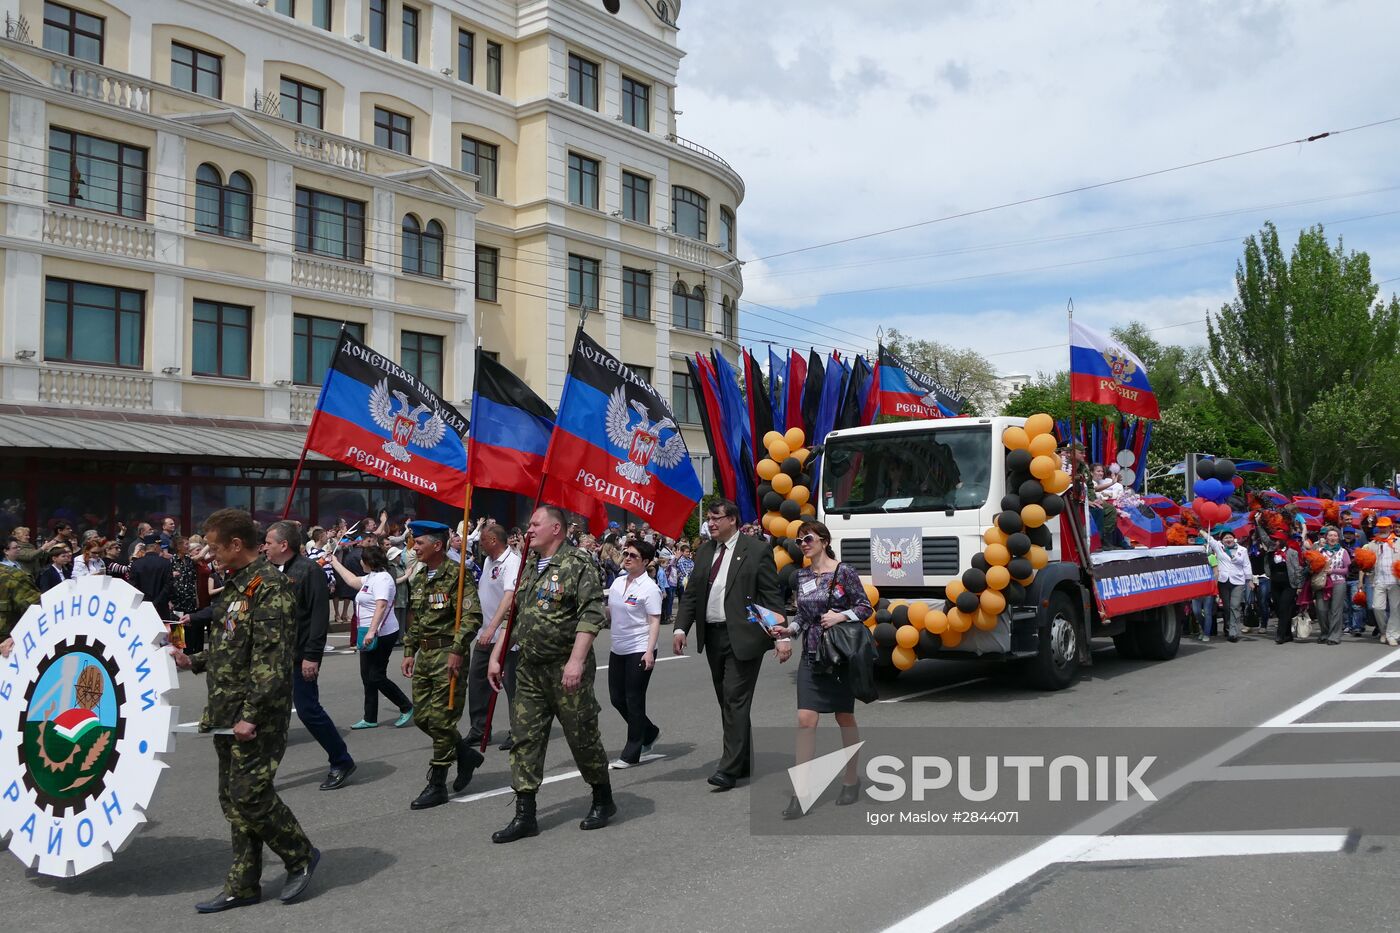 Republic Day celebrations in the Donetsk People's Republic